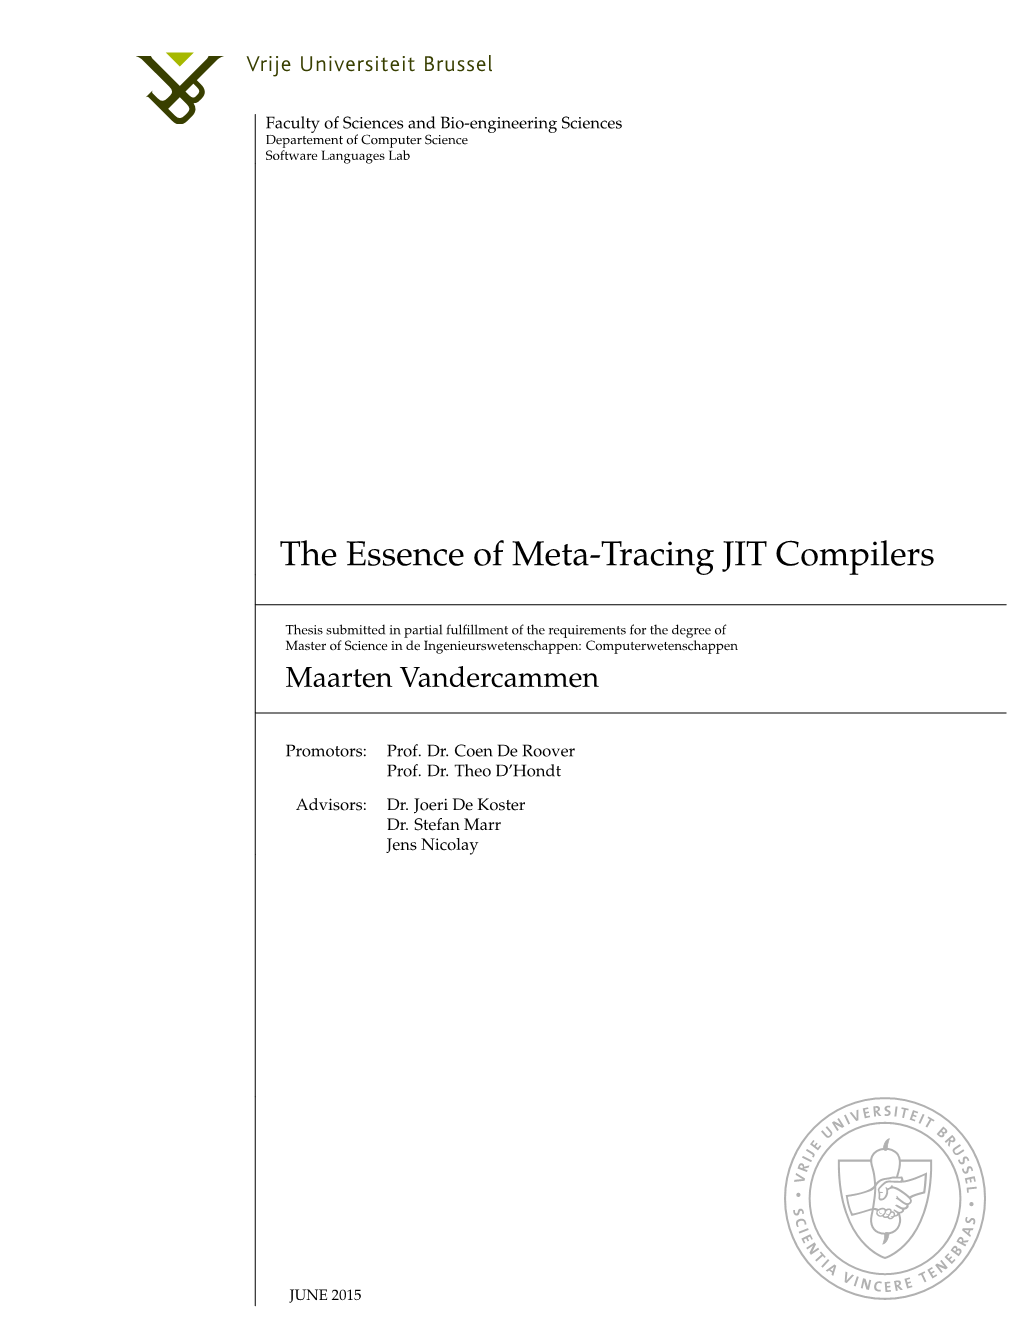 The Essence of Meta-Tracing JIT Compilers